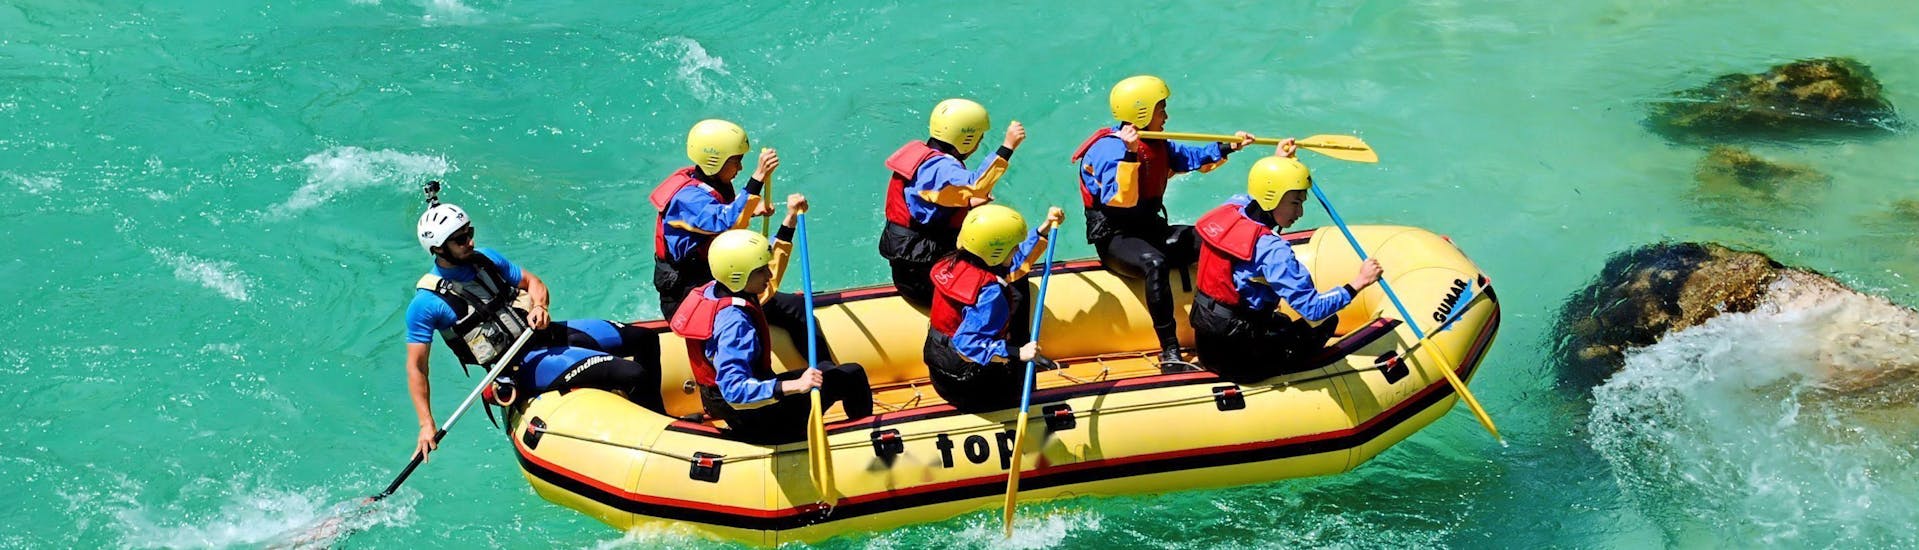 People enjoying the Rafting on the Soča River for Groups (from 8 people) with TOP Rafting Centre.